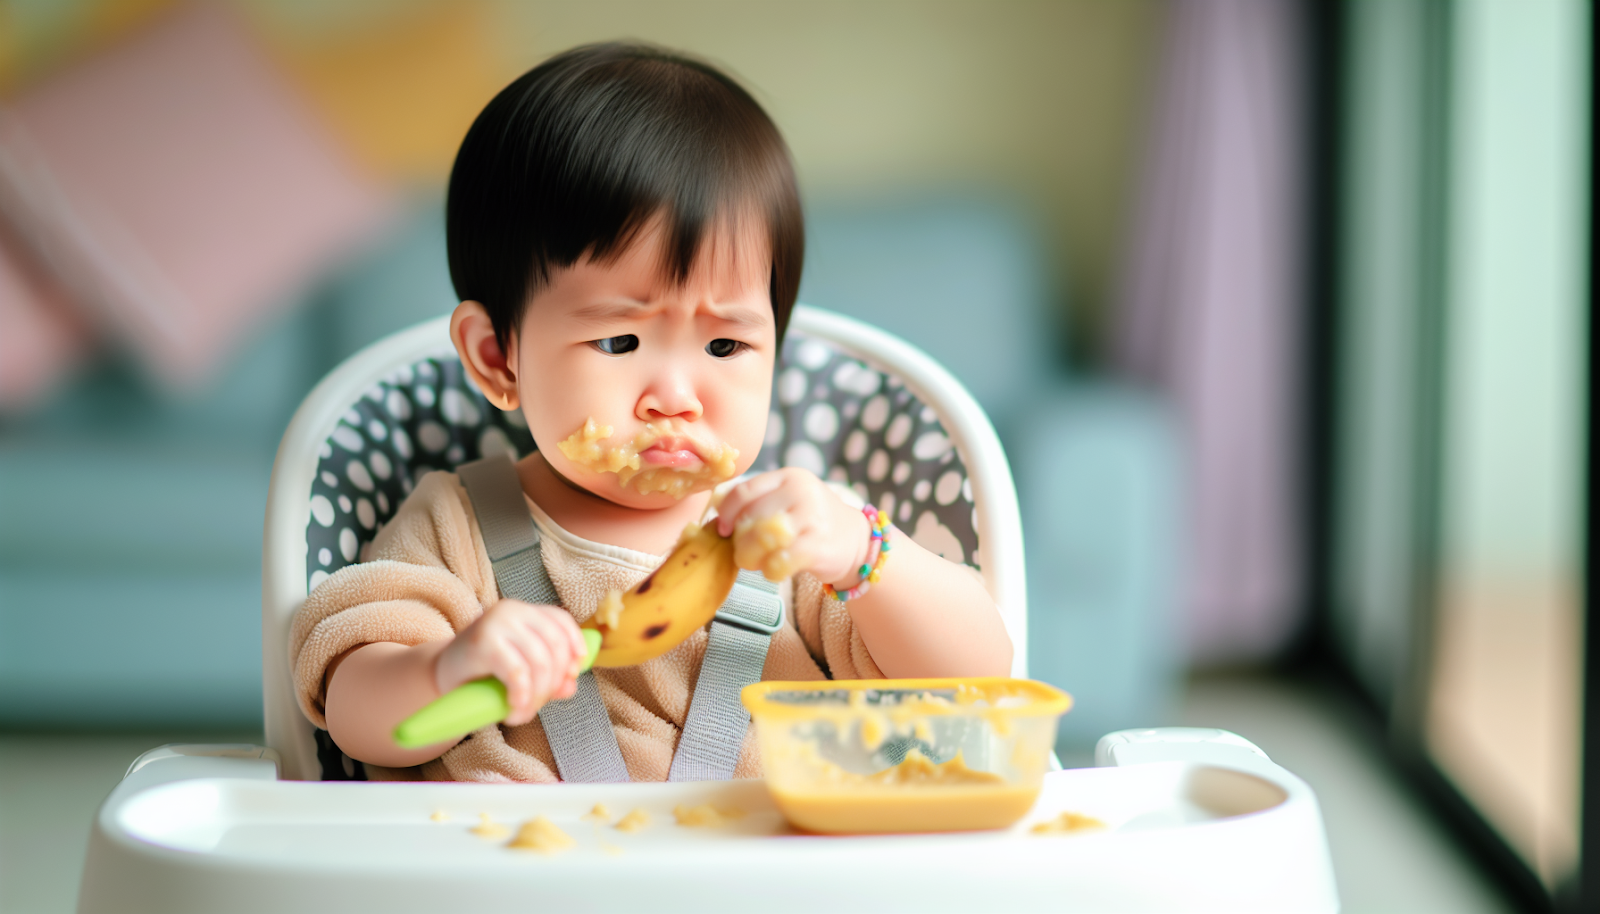 Baby in a high chair learning to eat with a puzzled expression, messy with food.